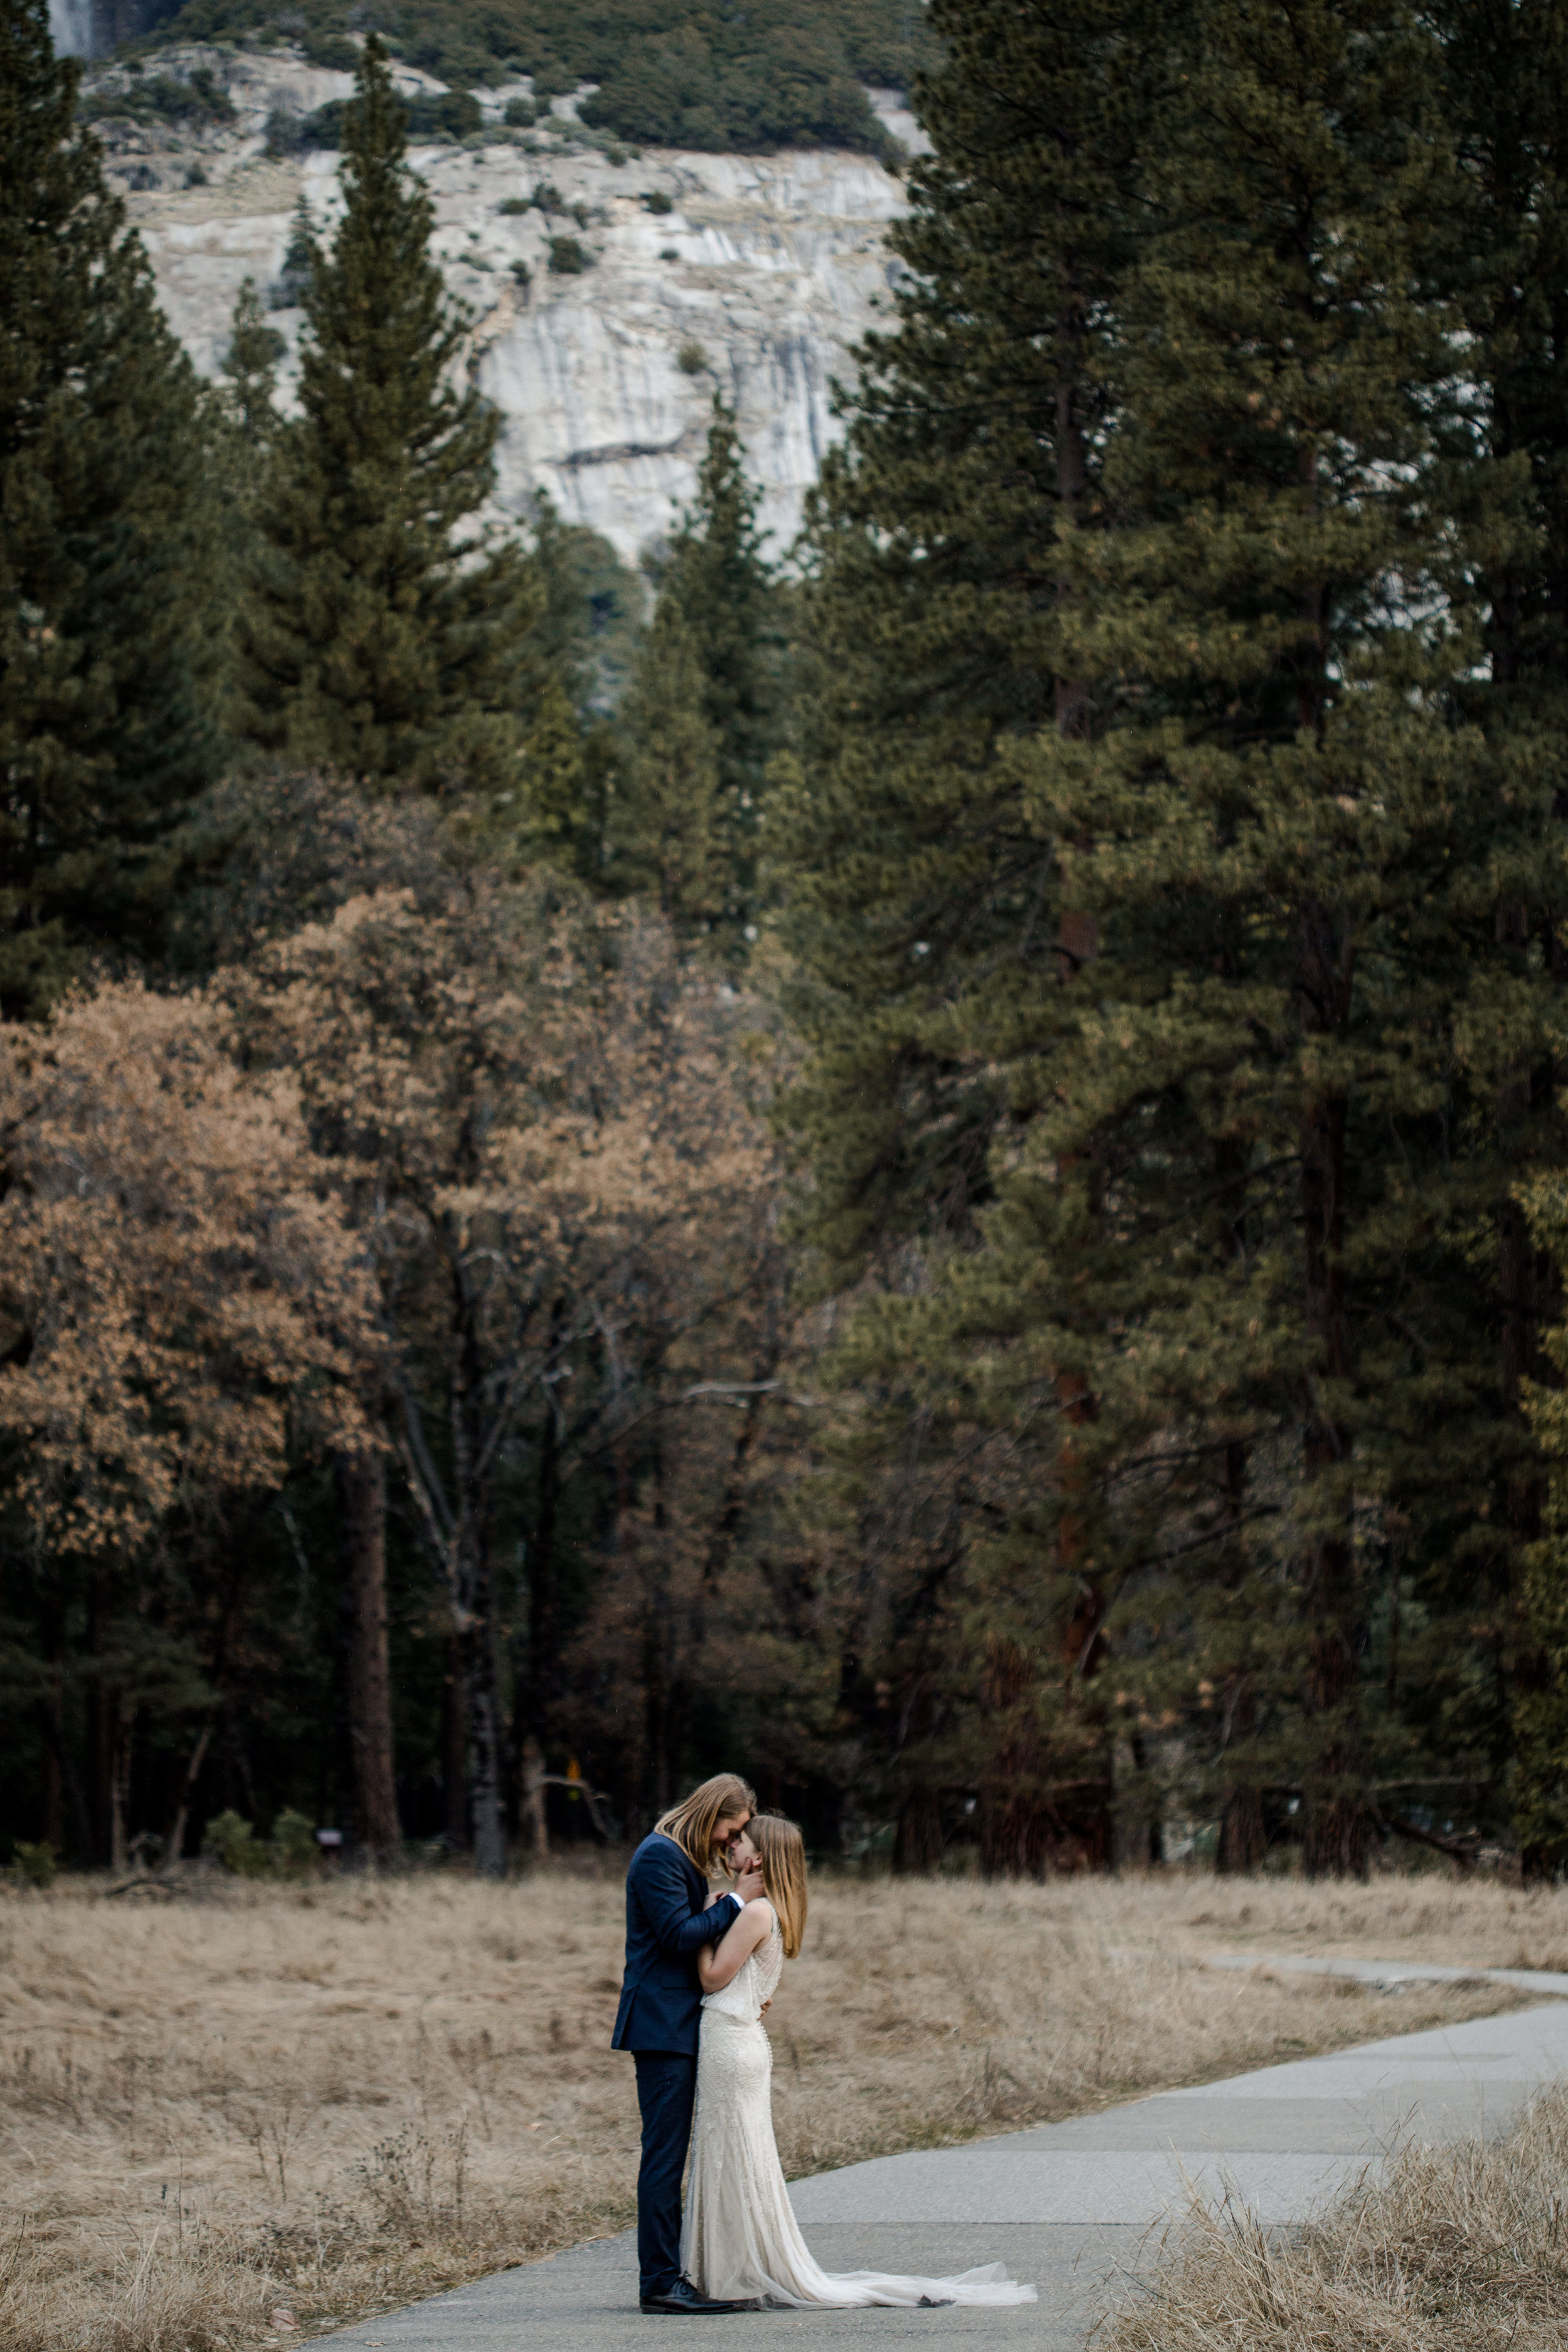 nicole-daacke-photography-yousemite-national-park-elopement-photographer-winter-cloud-moody-elope-inspiration-yosemite-valley-tunnel-view-winter-cloud-fog-weather-wedding-photos-24.jpg